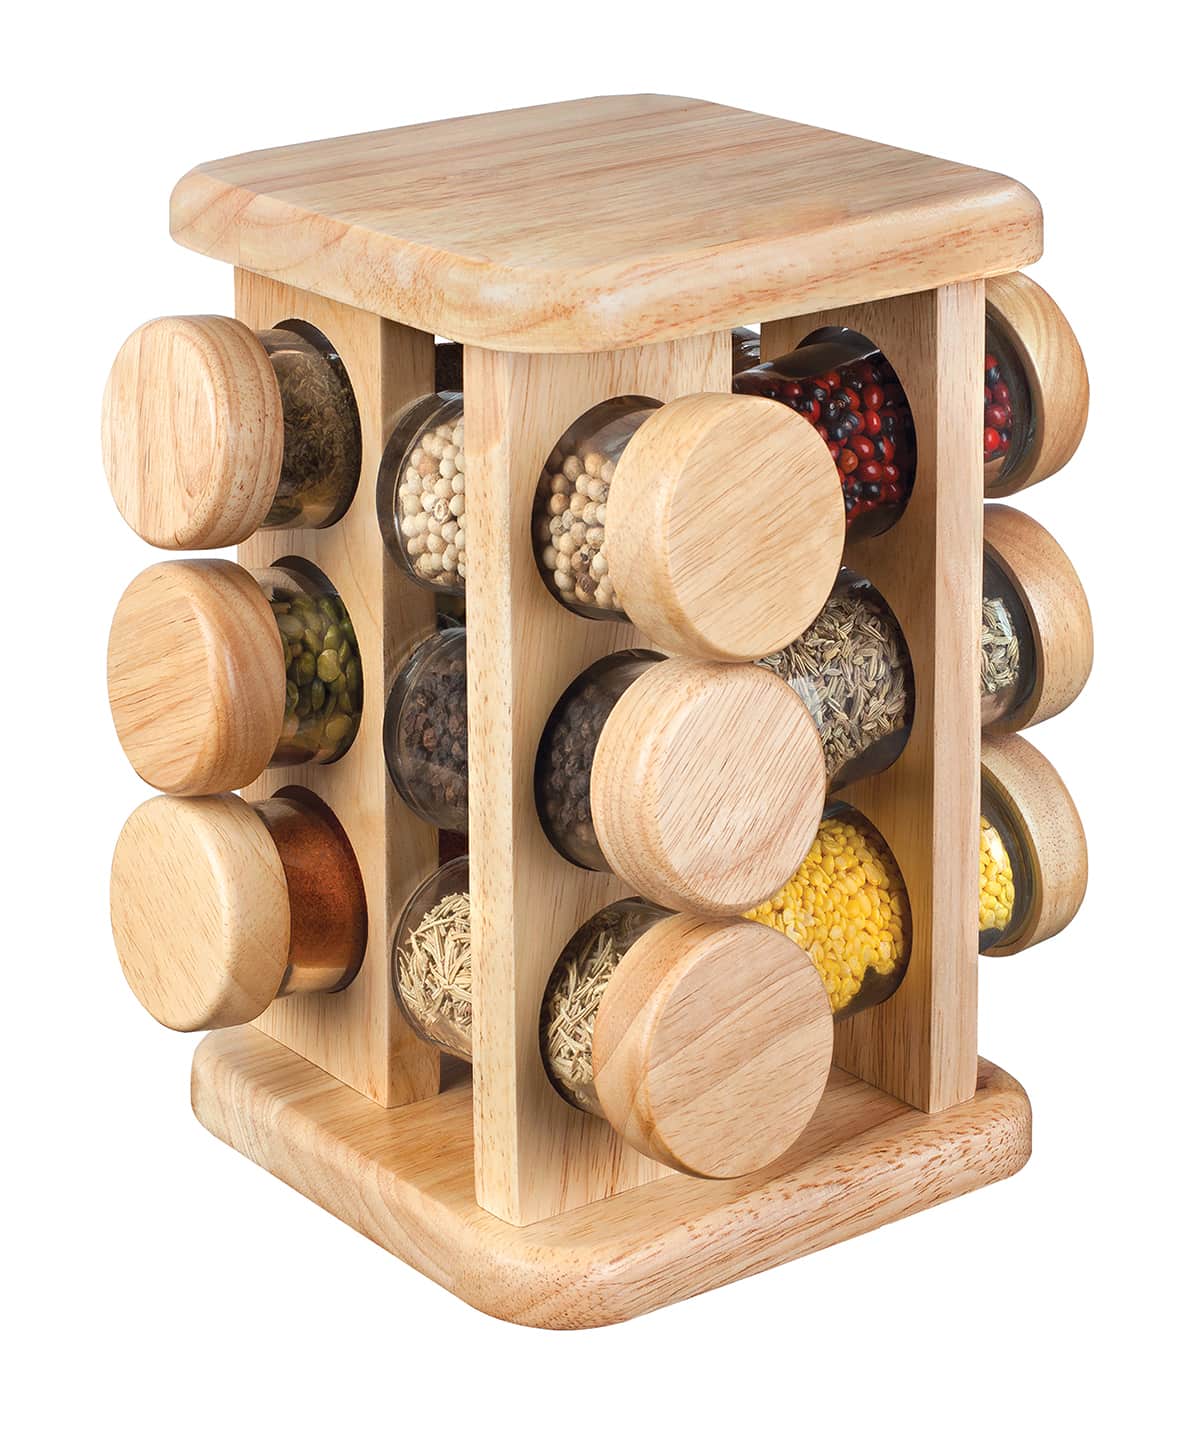 Organizing Your Spices with a Spice Rack